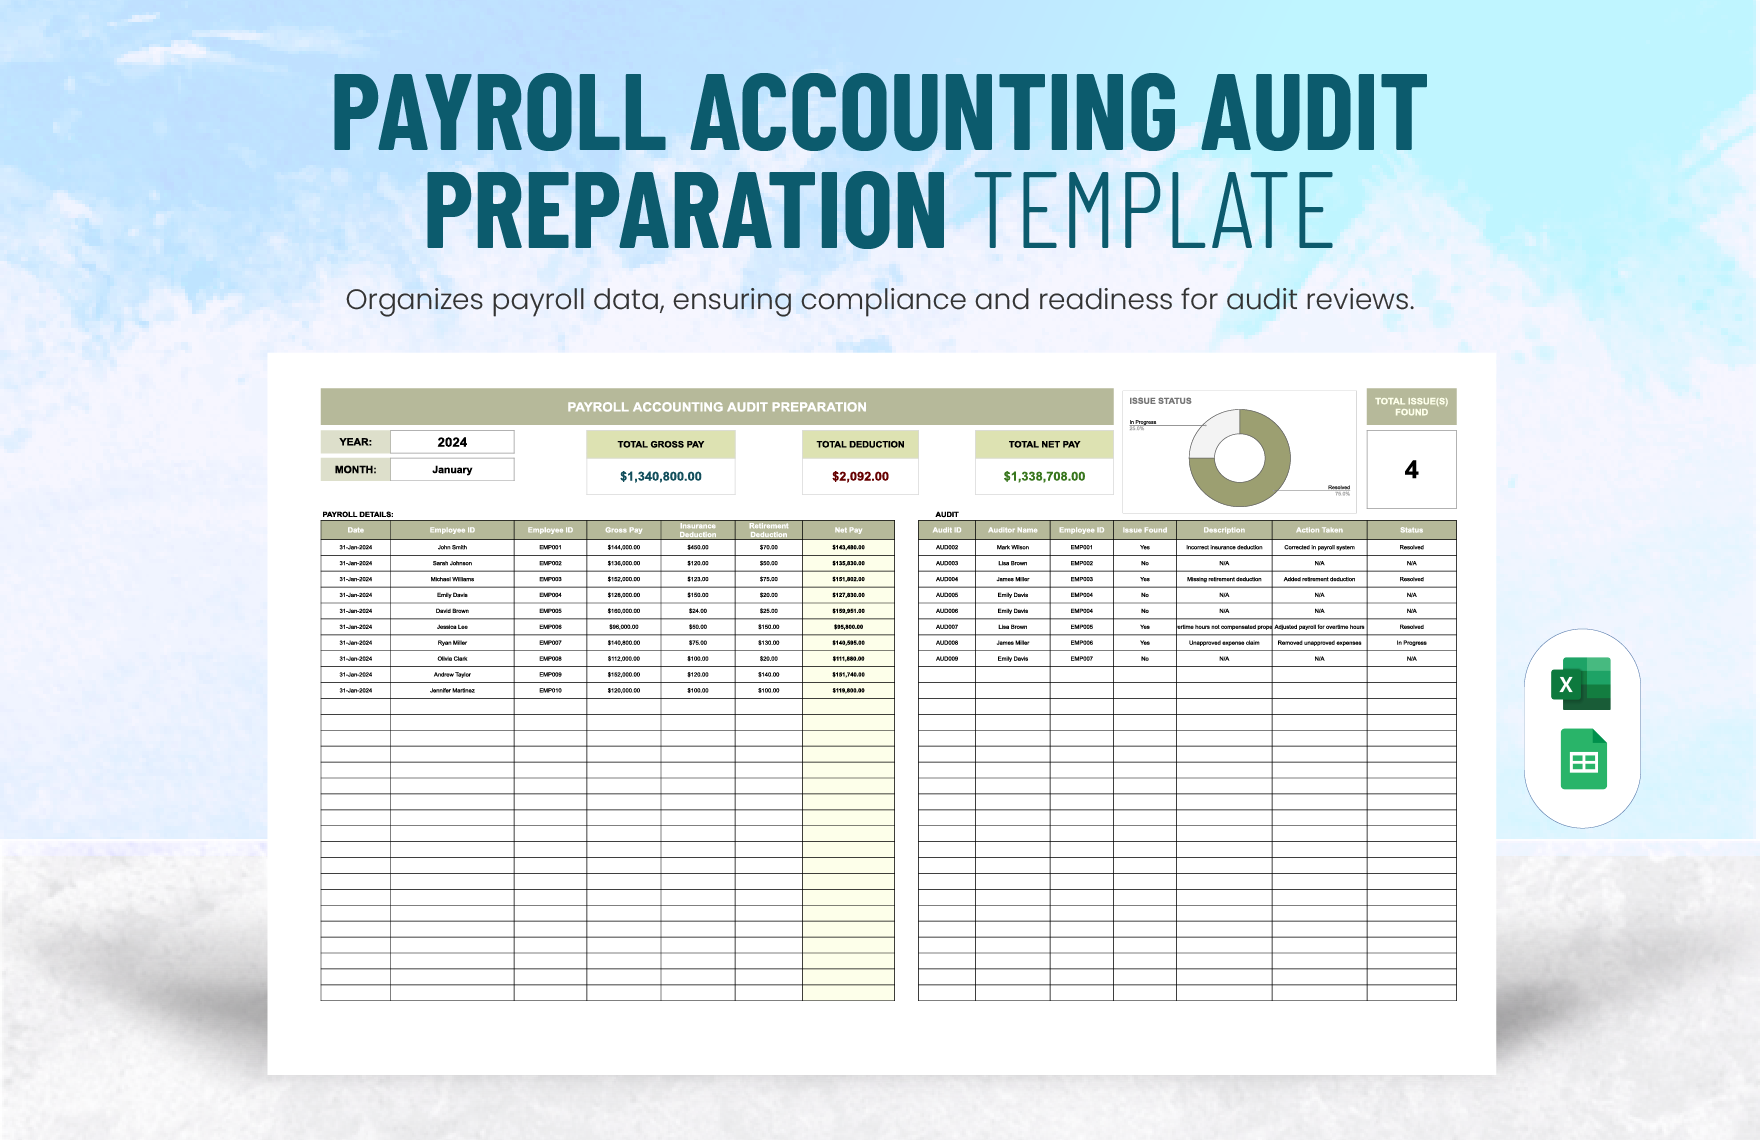 Payroll Accounting Audit Preparation Template in Excel, Google Sheets